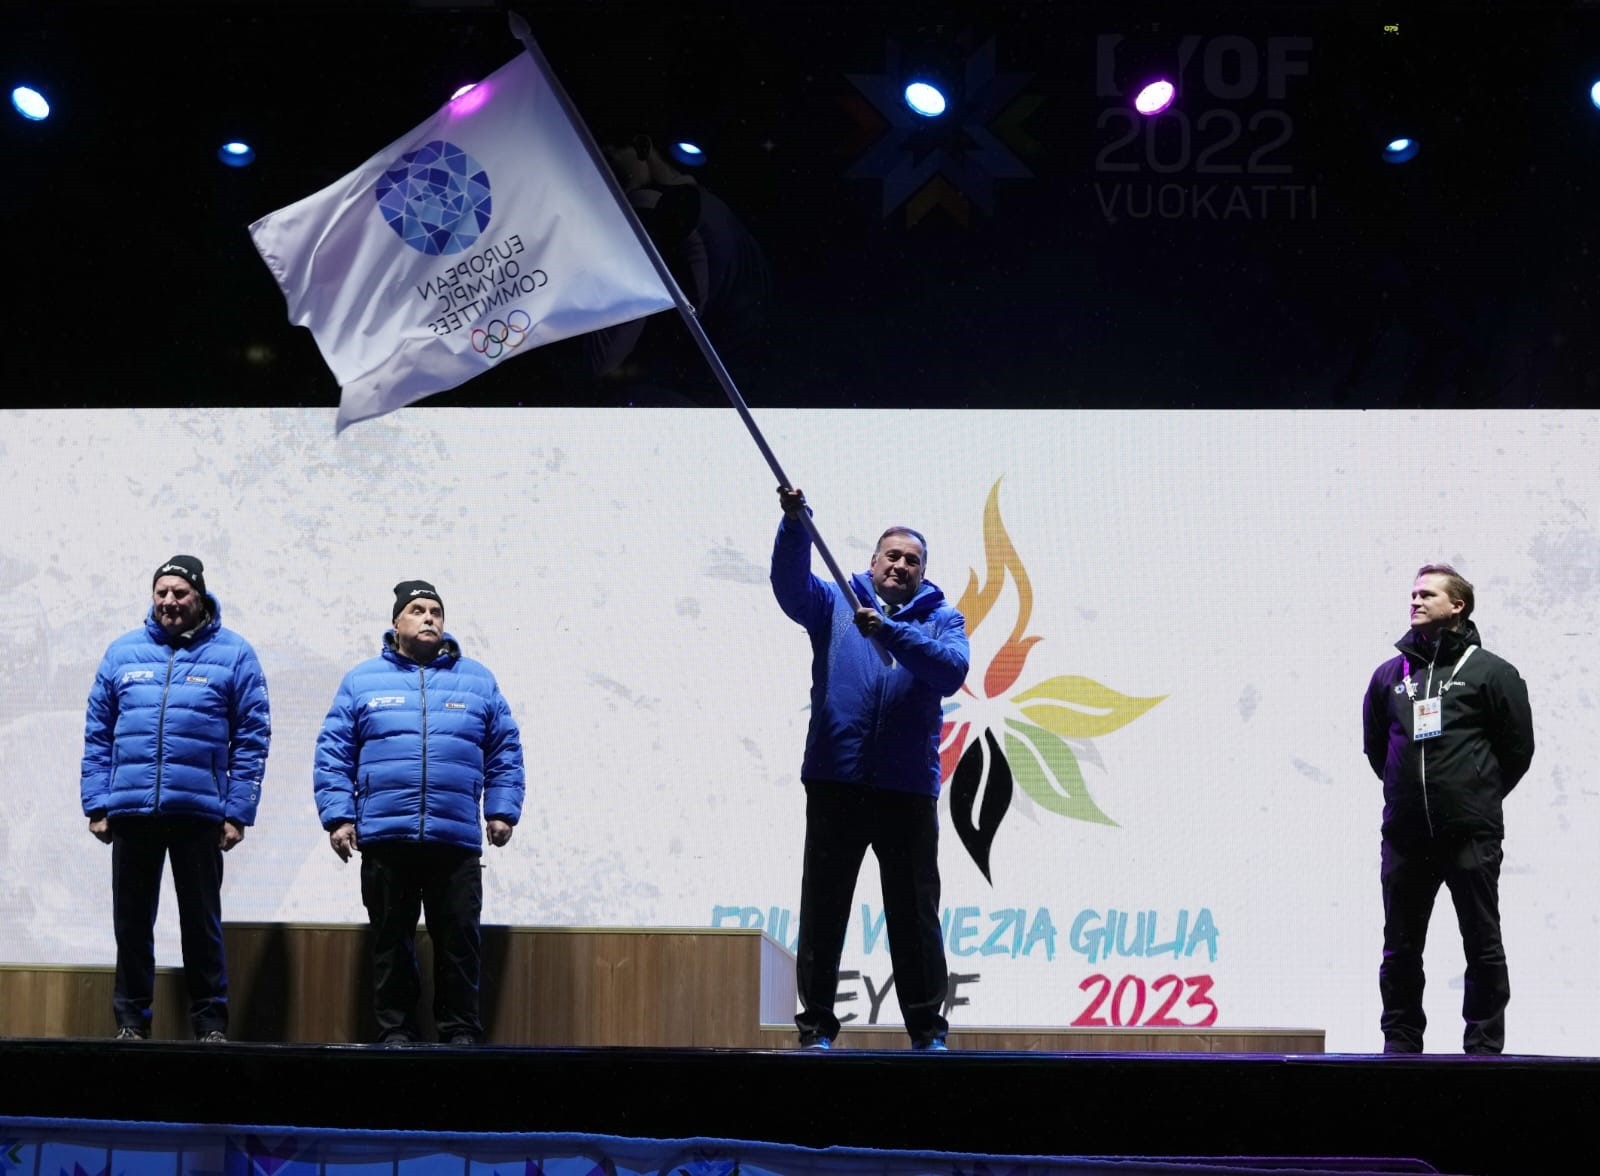 The Winter EYOF was the EOC's first multi-sport event since Greek official Spyros Capralos, second right, was elected as President last June ©Ignacio Casares